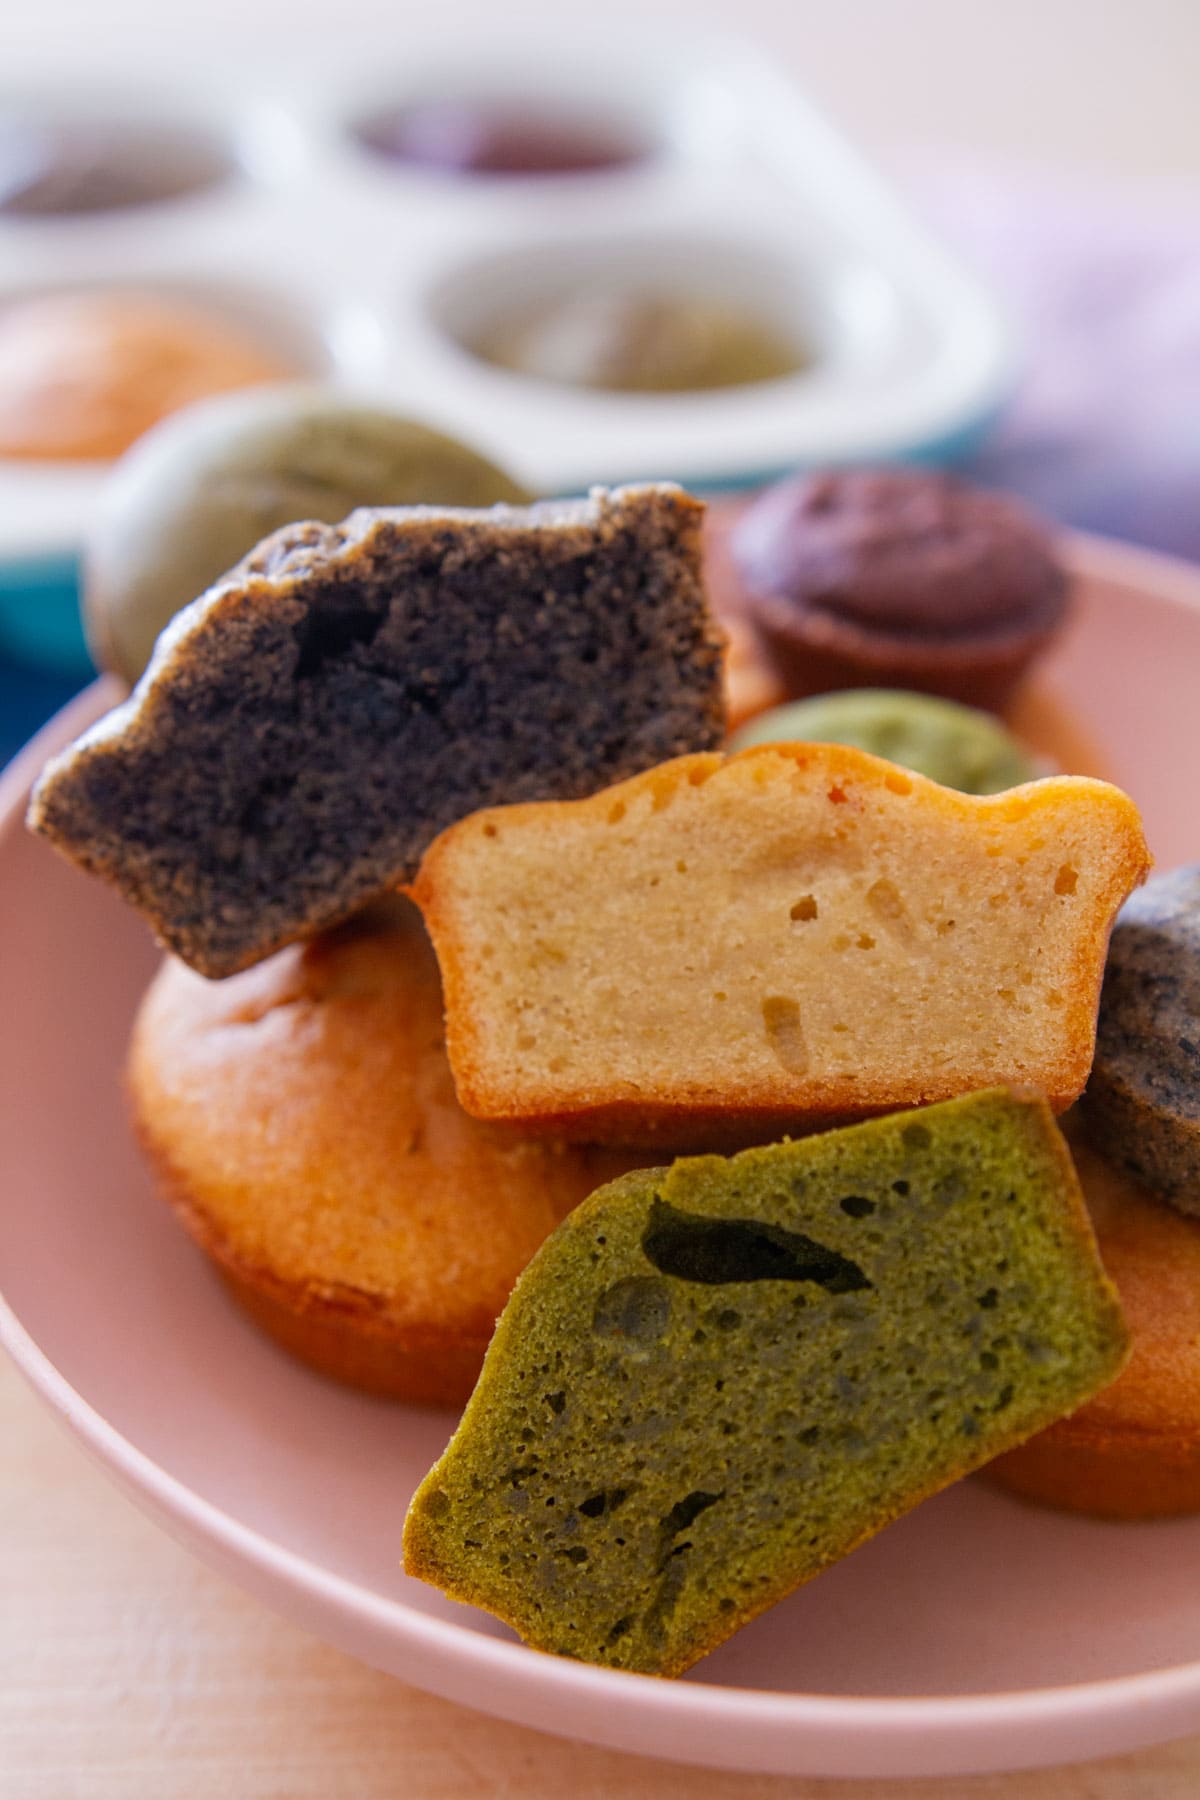 Close up view of three different mochi muffins cut in half to show the smooth texture on the inside, with the matcha flavor on the bottom, regular butter mochi flavor in the middle, and black sesame on top.